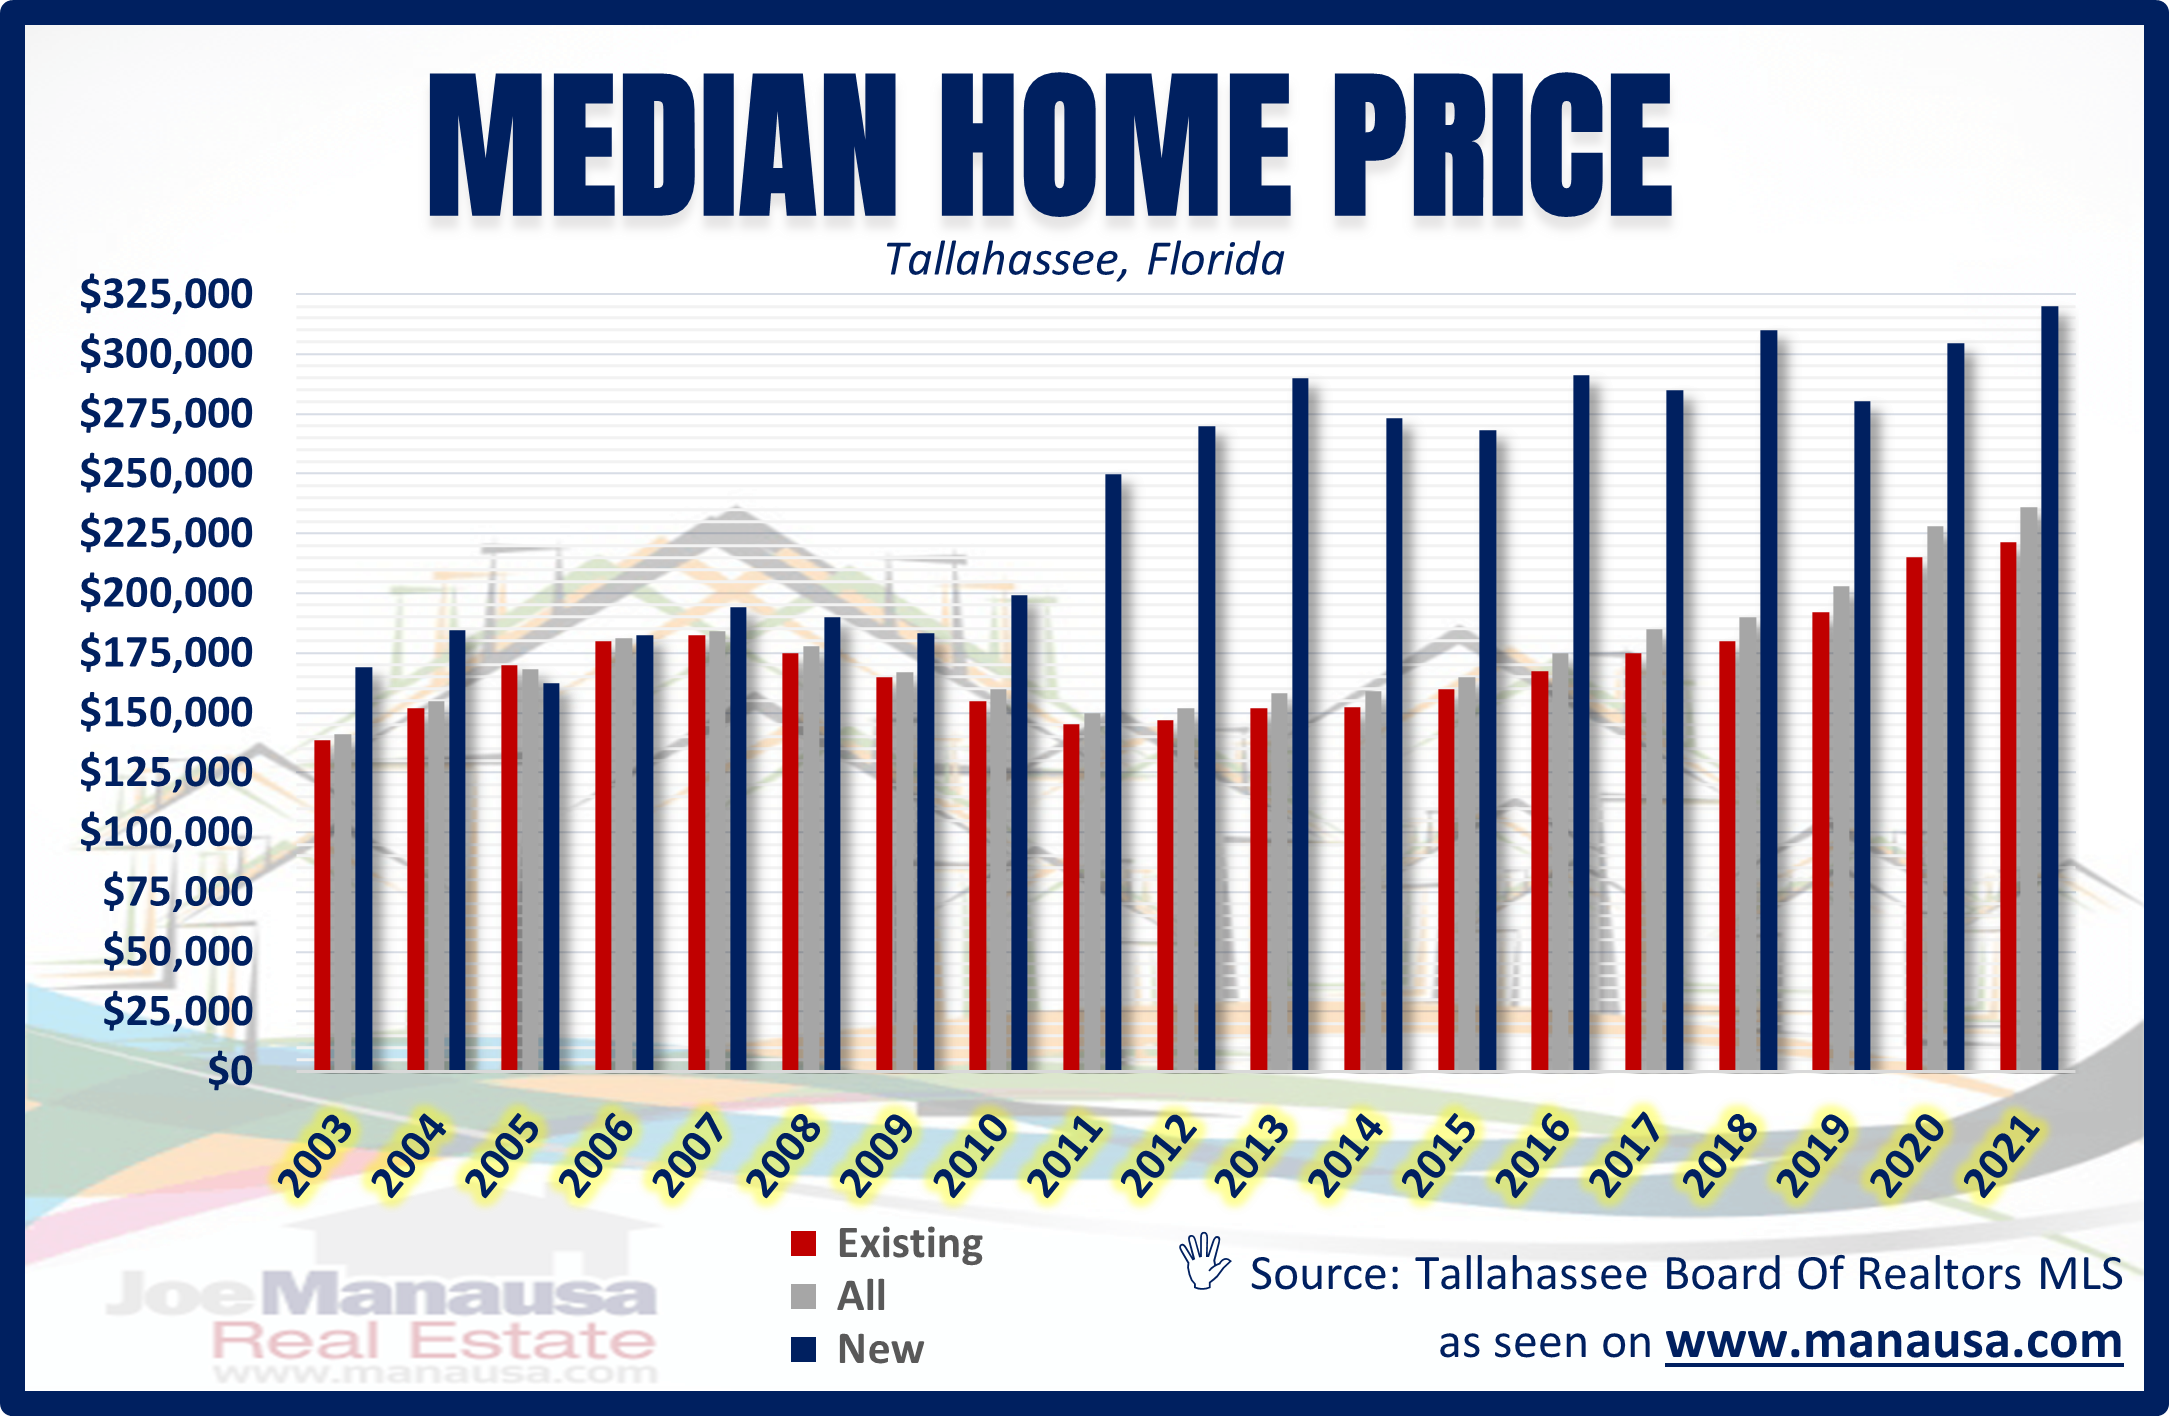 Tallahassee Median Home Price